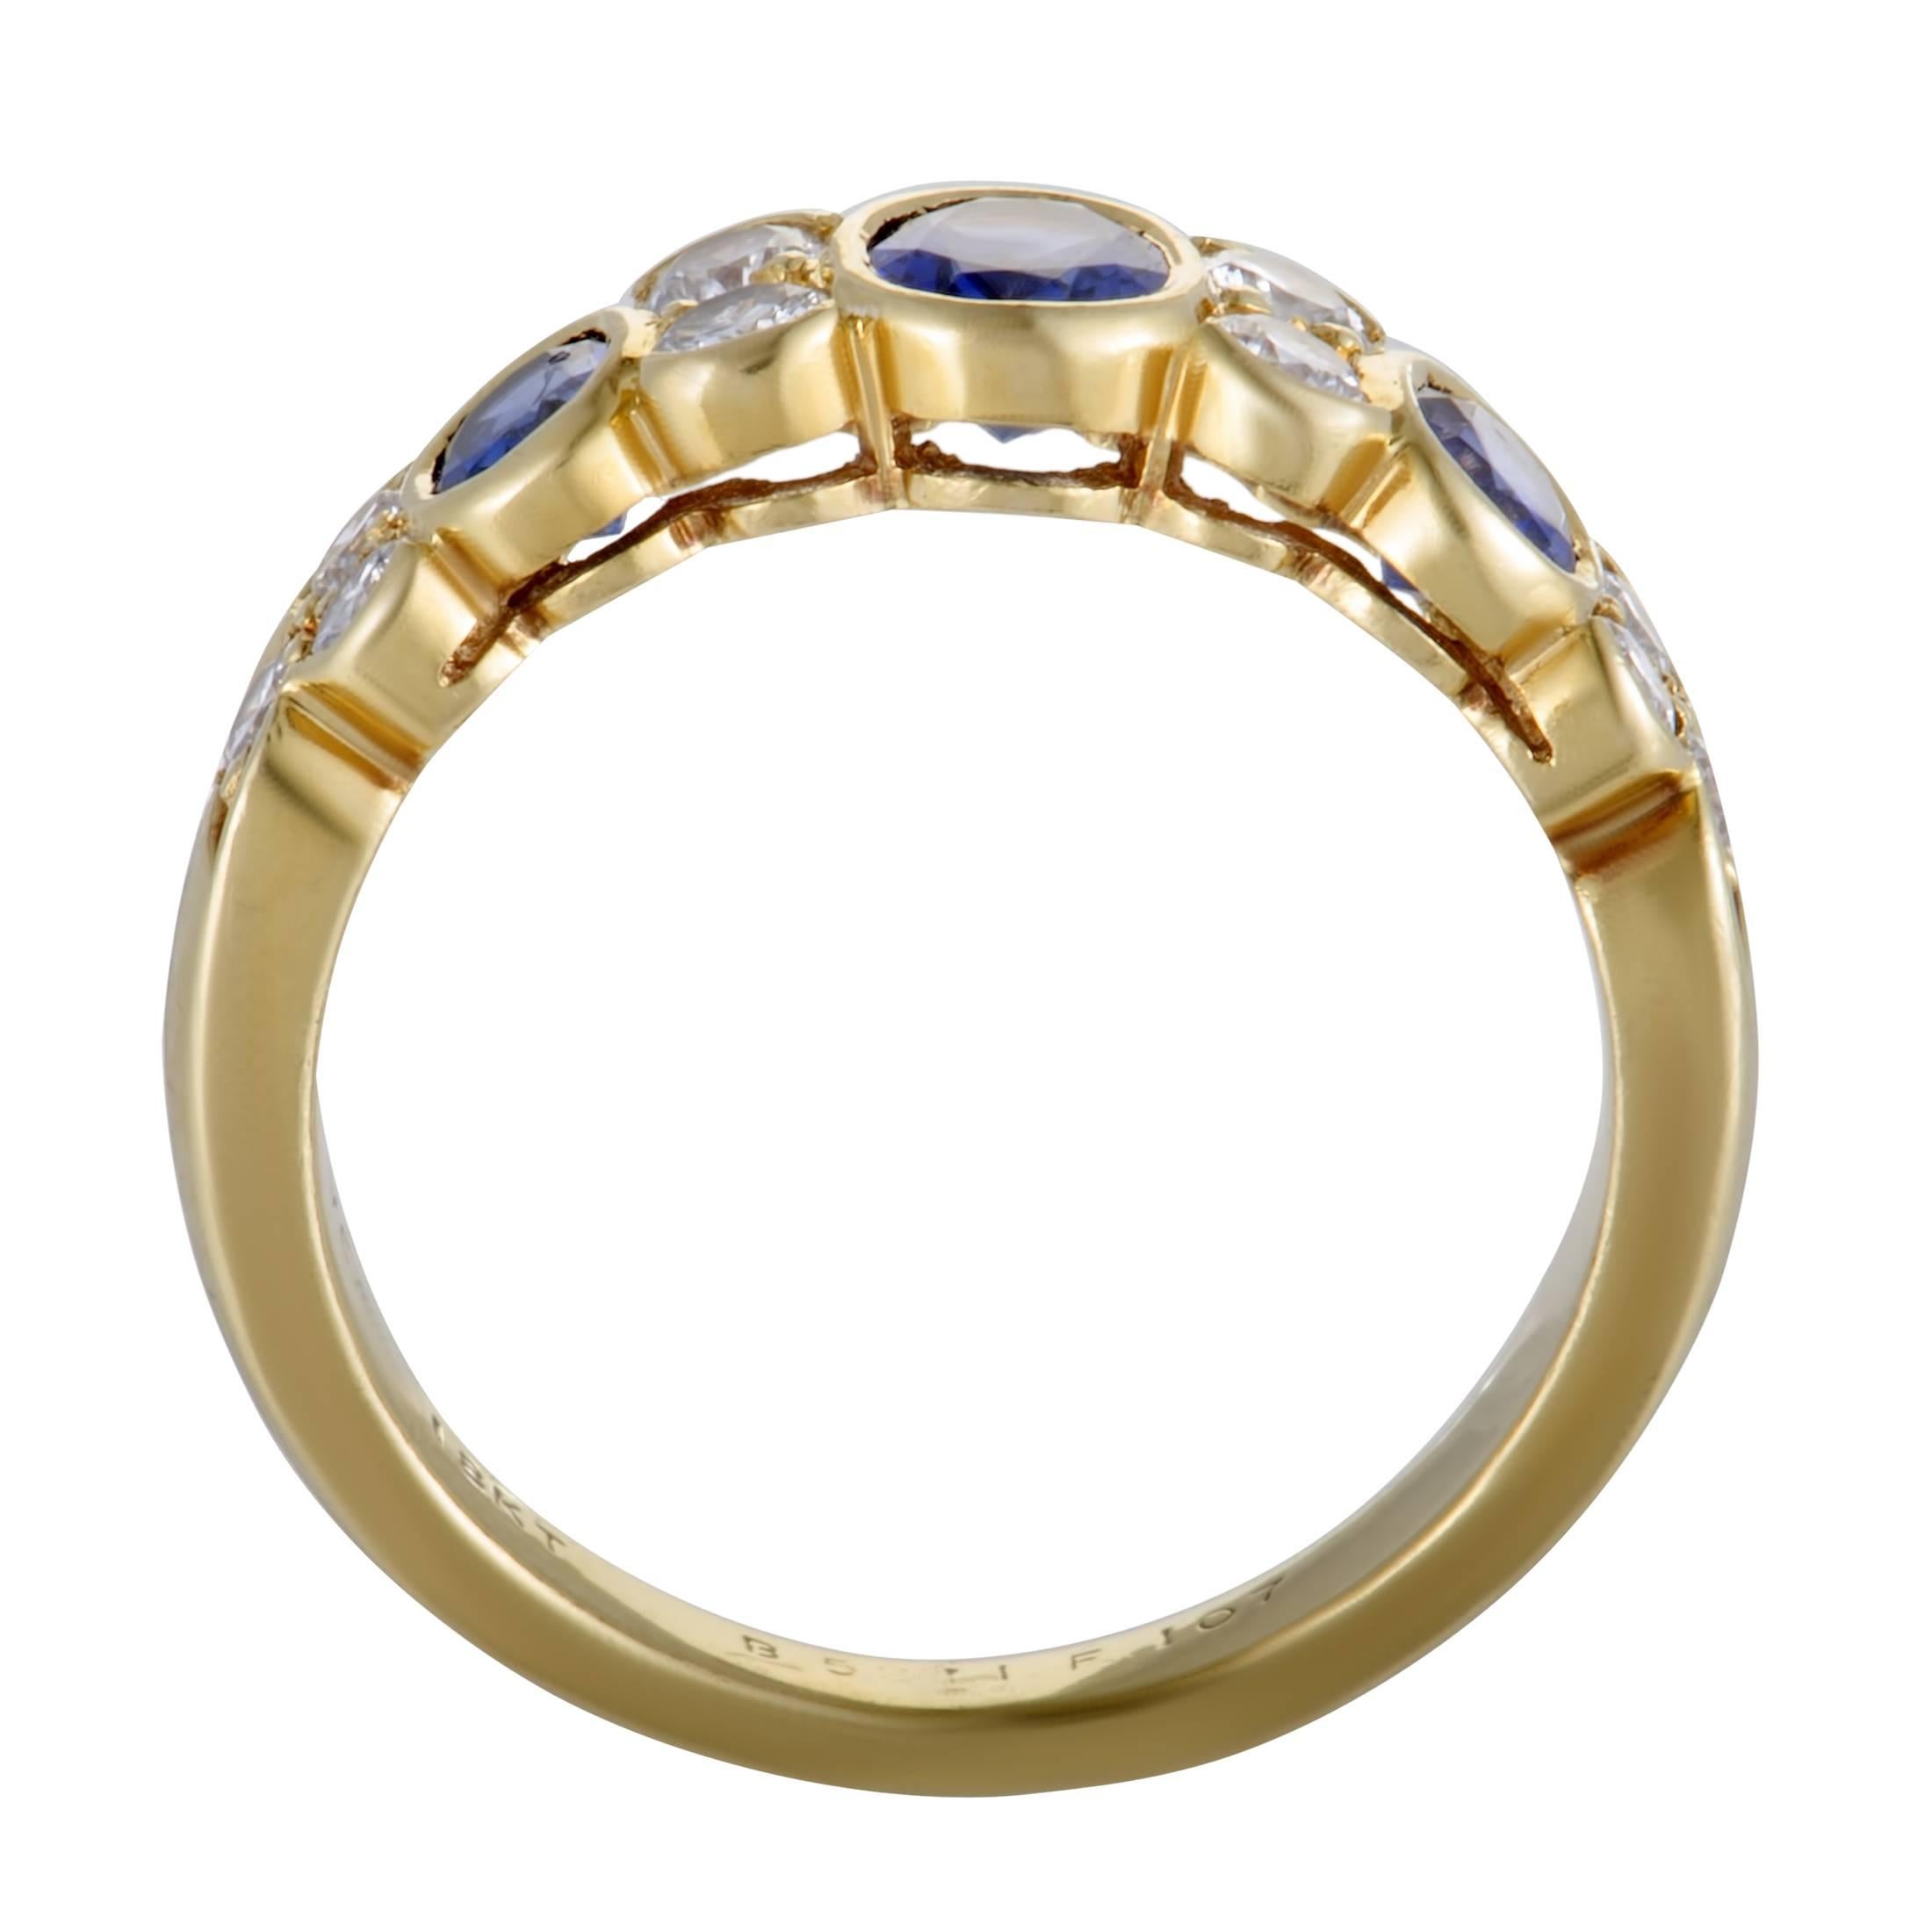 Featuring the incredibly luxurious combination of classy 18K yellow gold, glamorous diamonds and regal sapphires, this gorgeous Van Cleef & Arpels ring offers an exceptionally sophisticated appearance. The sapphires weigh in total 1.00 carat, and